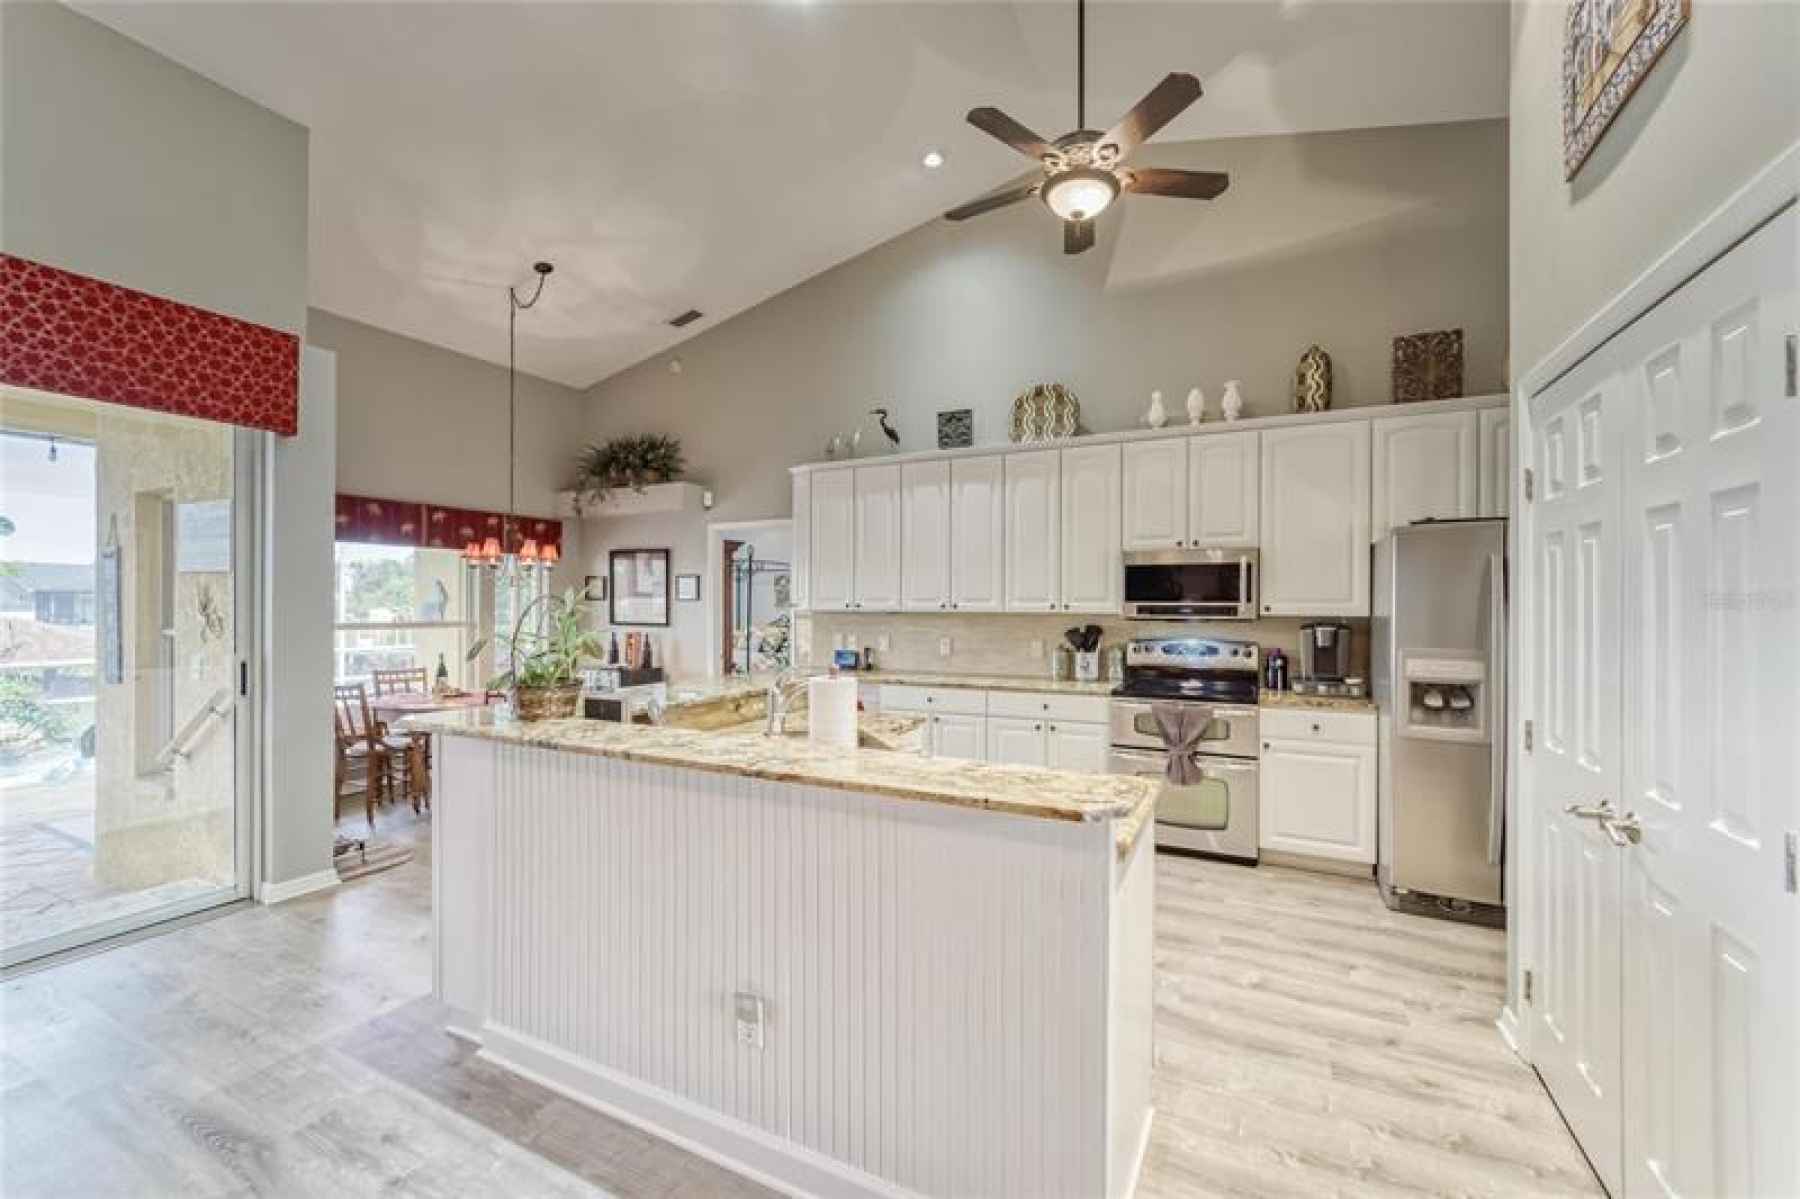 Tons of Cabinet & Counter Space - Cathedral Ceiling - Luxury Vinyl - Abundance of Natural Light